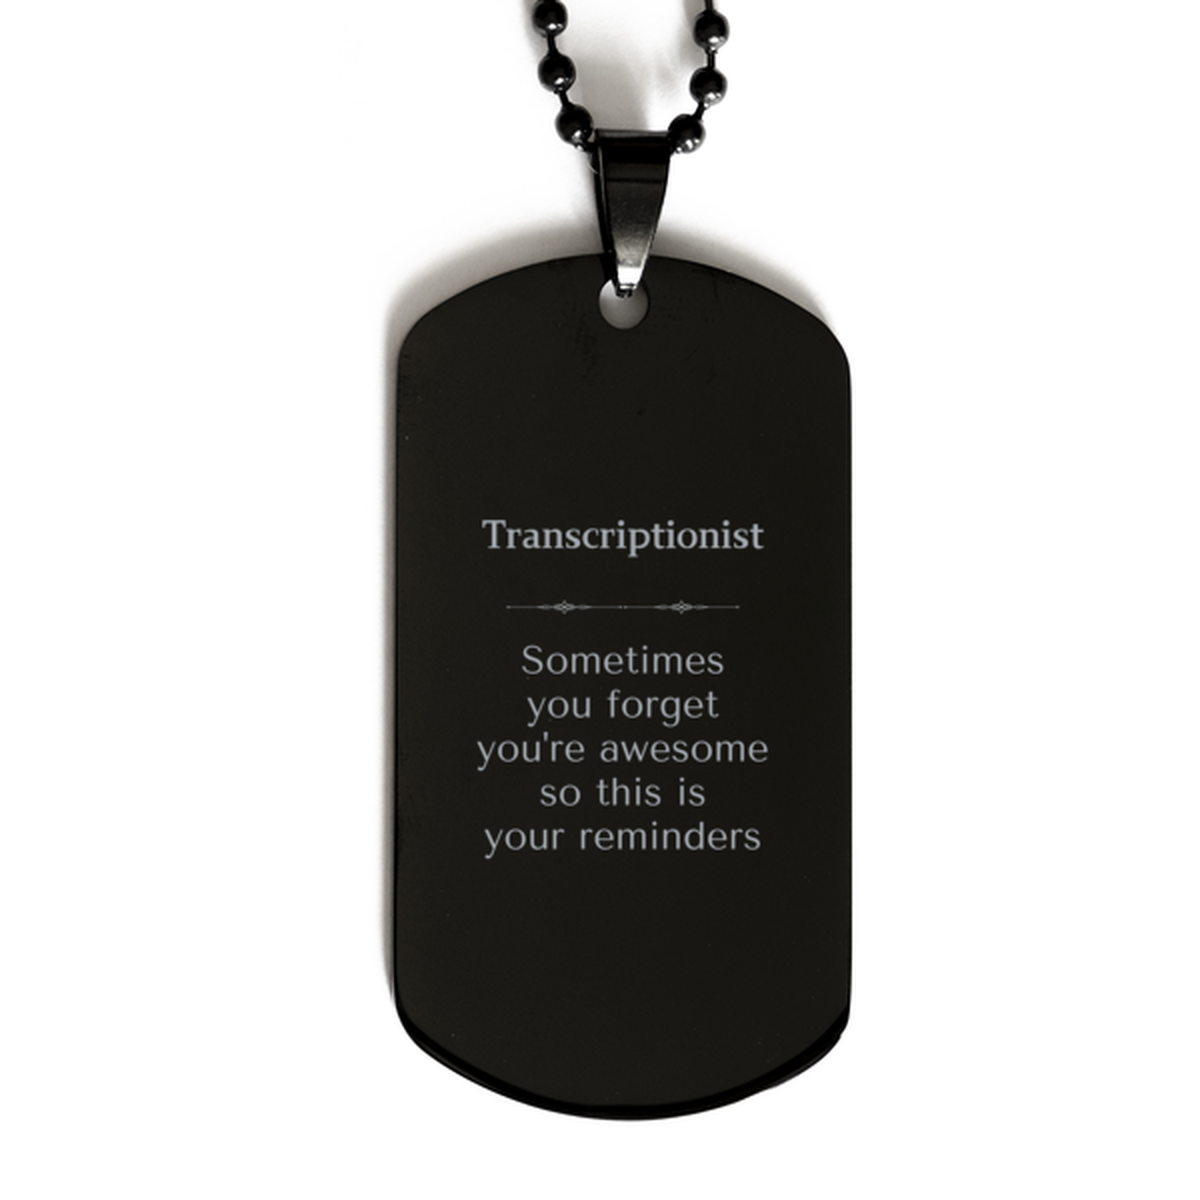 Sentimental Transcriptionist Black Dog Tag, Transcriptionist Sometimes you forget you're awesome so this is your reminders, Graduation Christmas Birthday Gifts for Transcriptionist, Men, Women, Coworkers